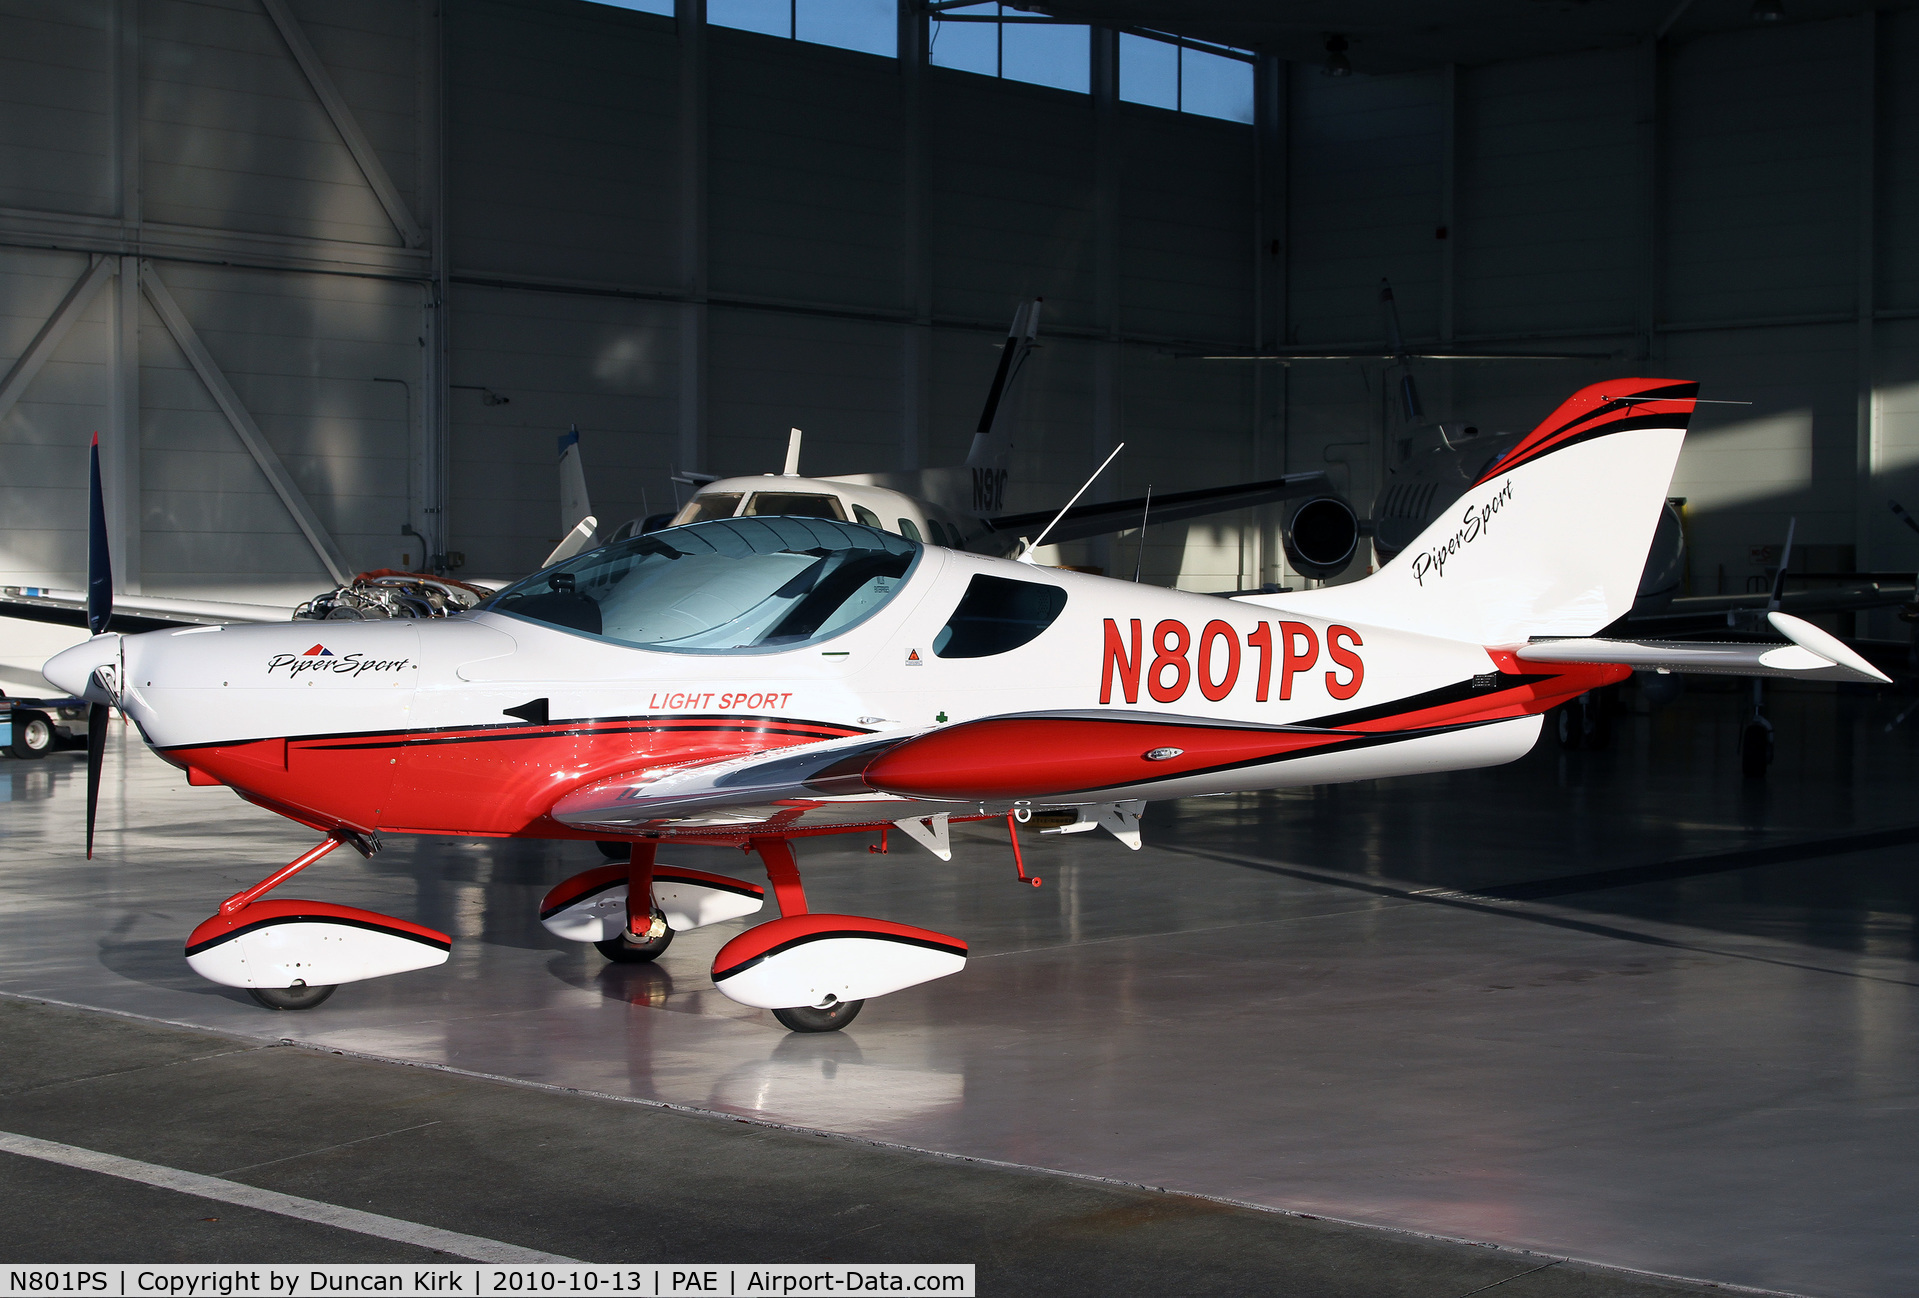 N801PS, SportCruiser (PiperSport) Piper Sport C/N P1001024, A light sport aircraft that you can fly without a current medical certificate